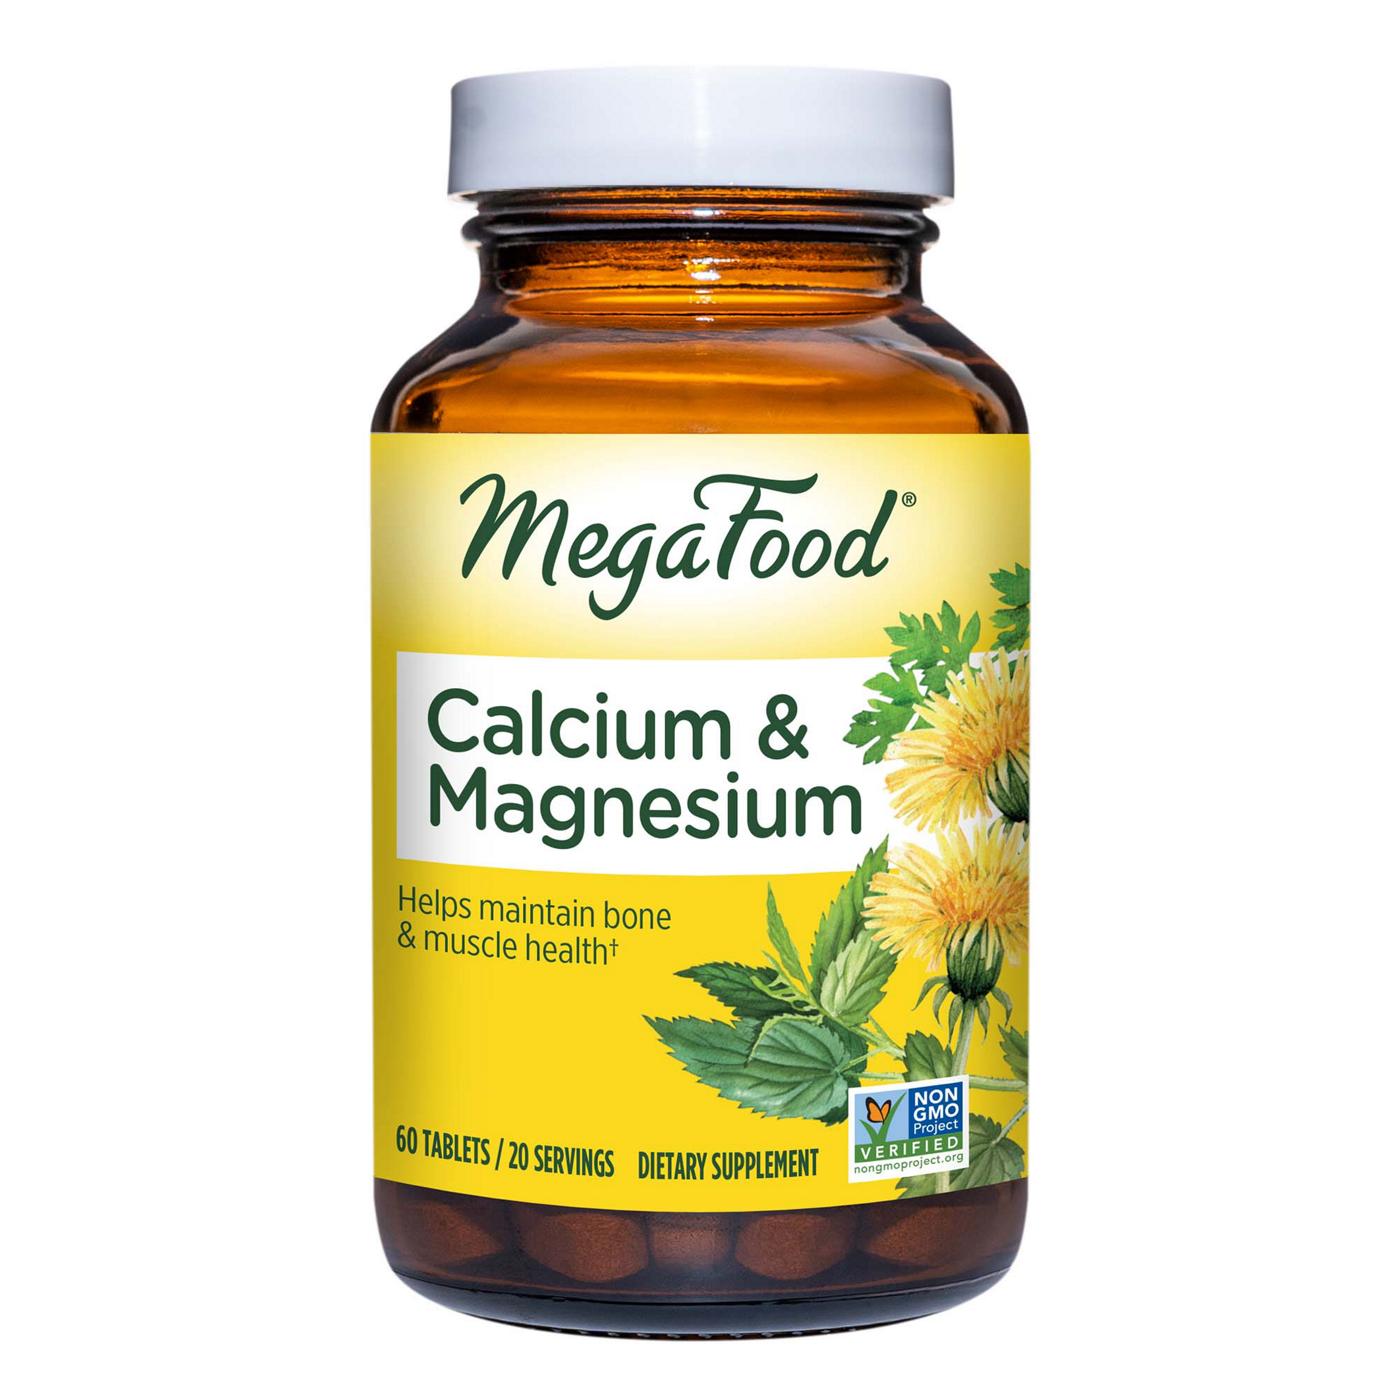 MegaFood Calcium & Magnesium Tablets; image 1 of 4